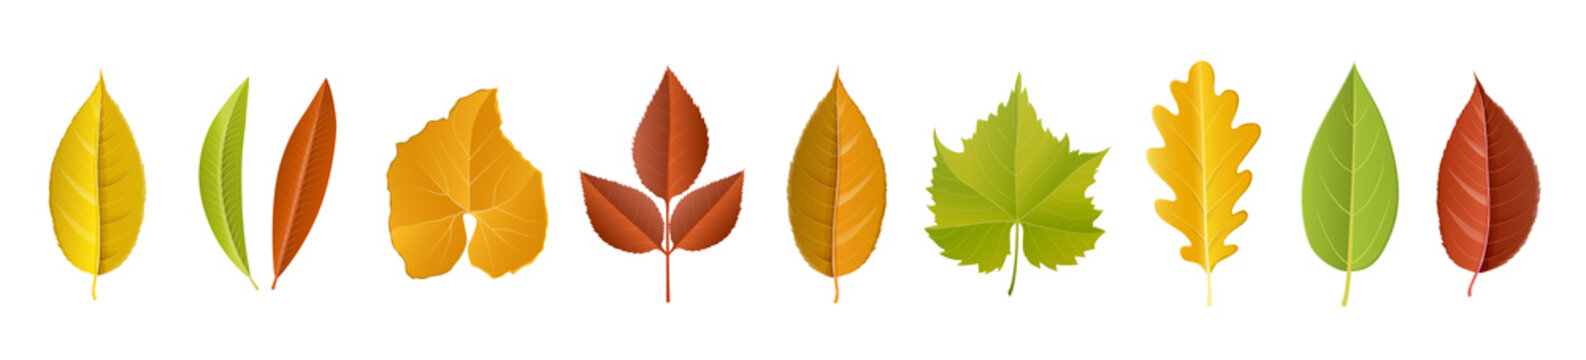 Autumn leaf collection with different fall color, and specie, including cherry tree leaf, oak, rose, grapes, pumpkin. Vector illustration, horizontal banner, isolated on white for fall season design